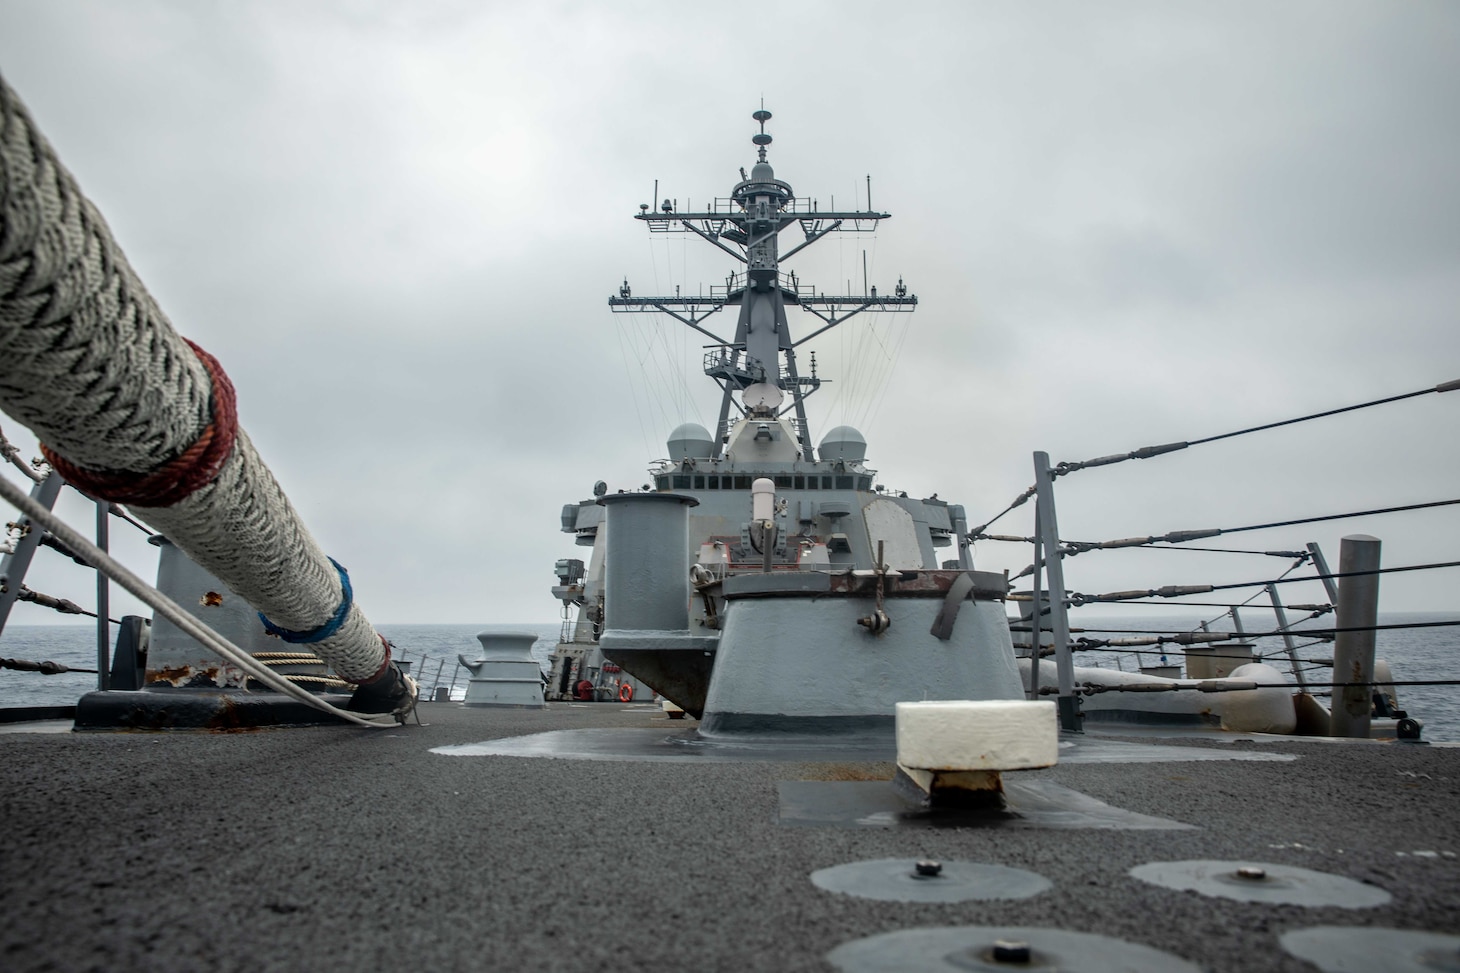 TAIWAN STRAIT (May 18, 2021) – The Arleigh Burke-class guided-missile destroyer USS Curtis Wilbur (DDG 54) conducts routine operations. Curtis Wilbur is assigned to Commander, Task Force 71/Destroyer Squadron (DESRON) 15, the Navy’s largest forward DESRON and the U.S. 7th Fleet’s principal surface force. (U.S. Navy photo by Mass Communication Specialist 3rd Class Zenaida Roth)